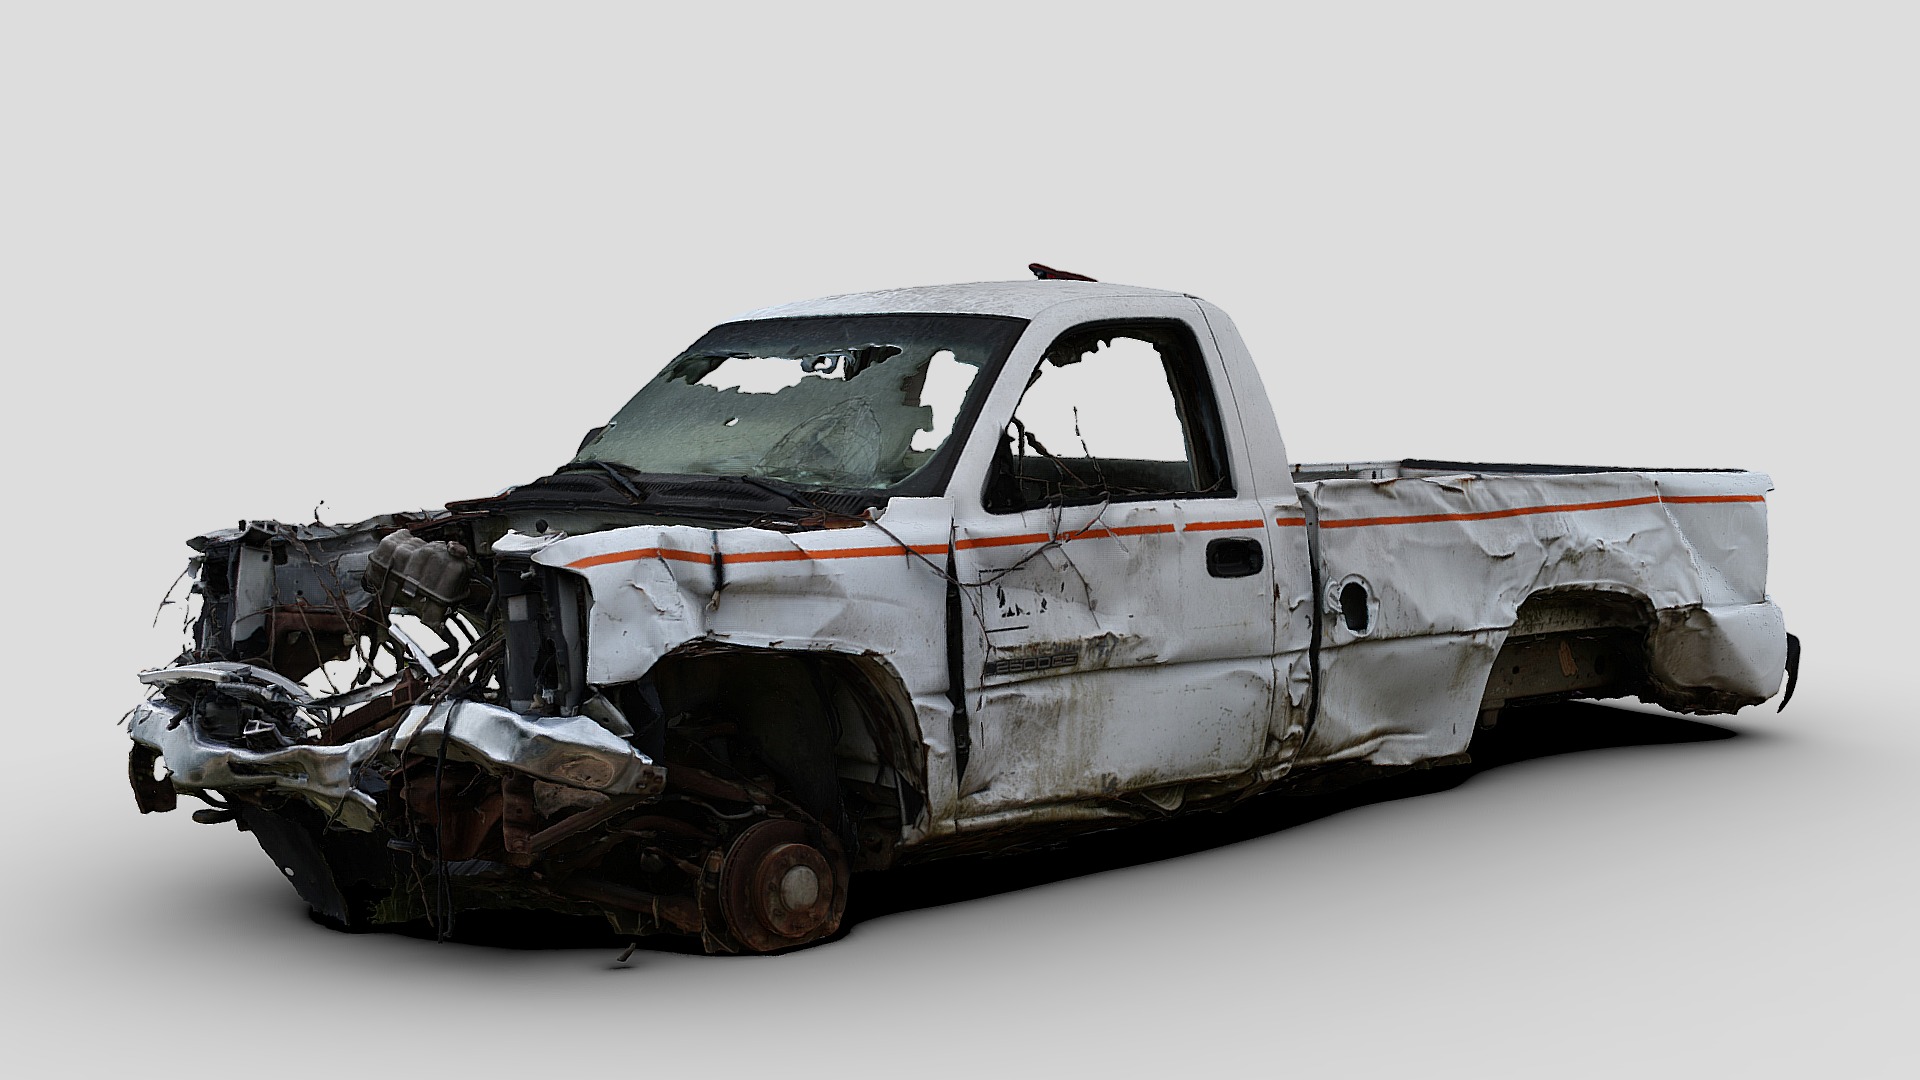 3D model Wrecked Work Truck (Raw Scan) - This is a 3D model of the Wrecked Work Truck (Raw Scan). The 3D model is about a wrecked car on a white background.